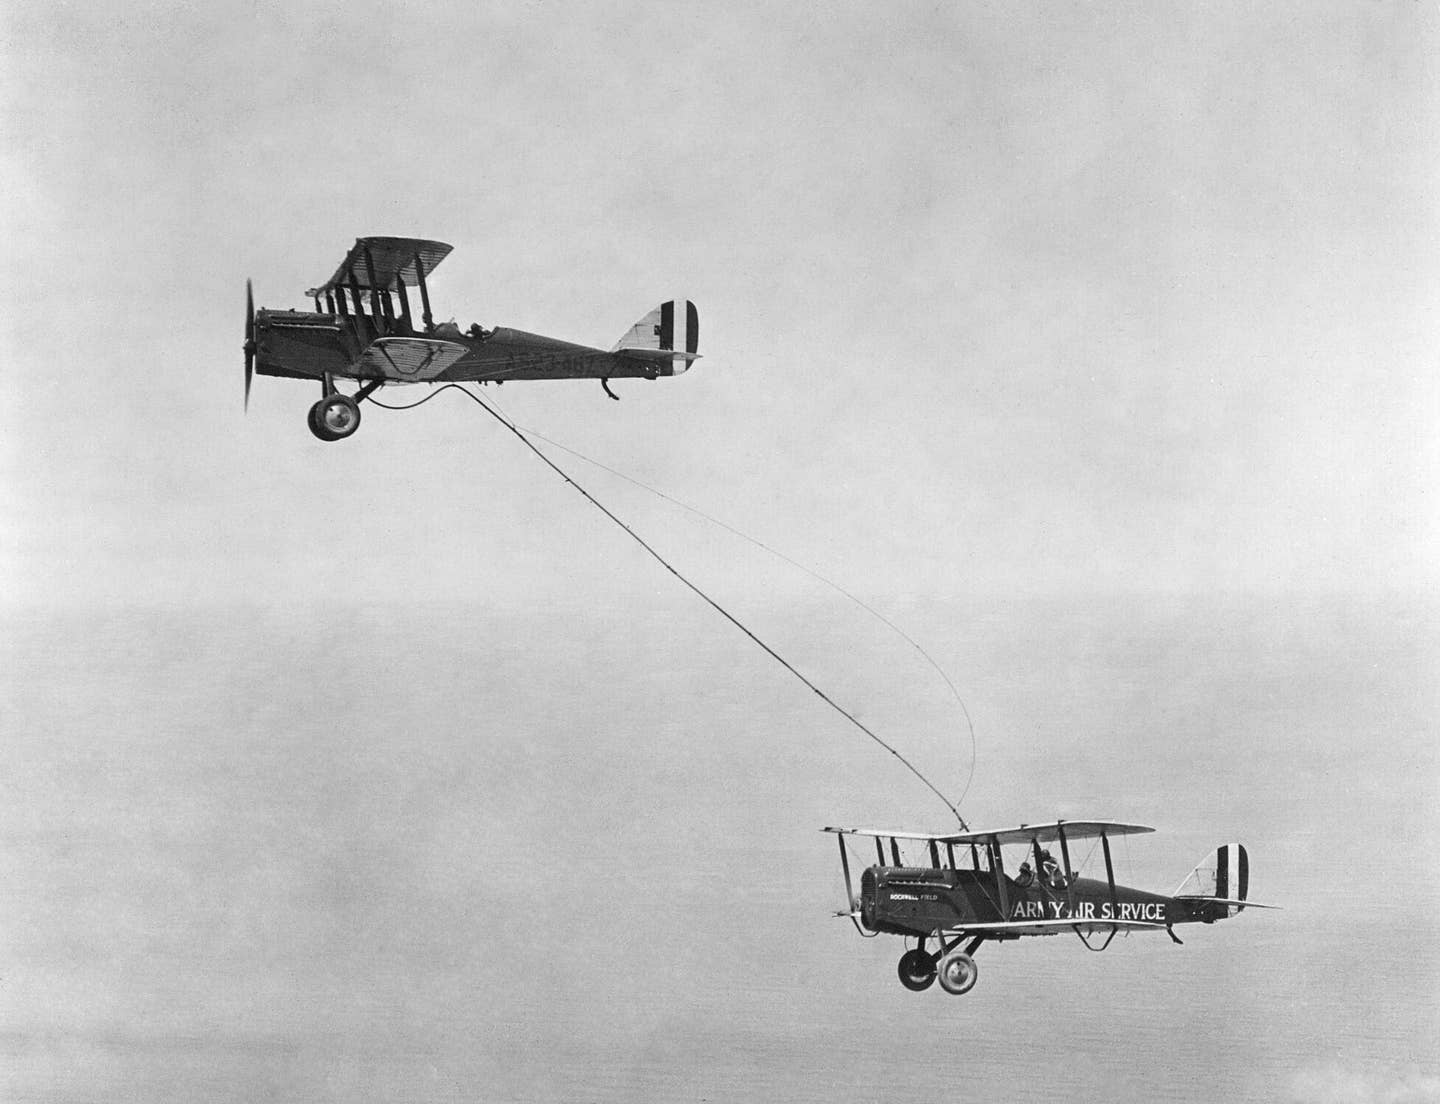 Refueling in mid-air at Rockwell Field, California, June 27, 1923. The tanker was flown by 1st Lt. Virgil Hine and 1st Lt. Frank W. Seifert, the receiver by Capt. Lowell H. Smith and 1st Lt. John P. Richter. <em>U.S. Air Force</em>